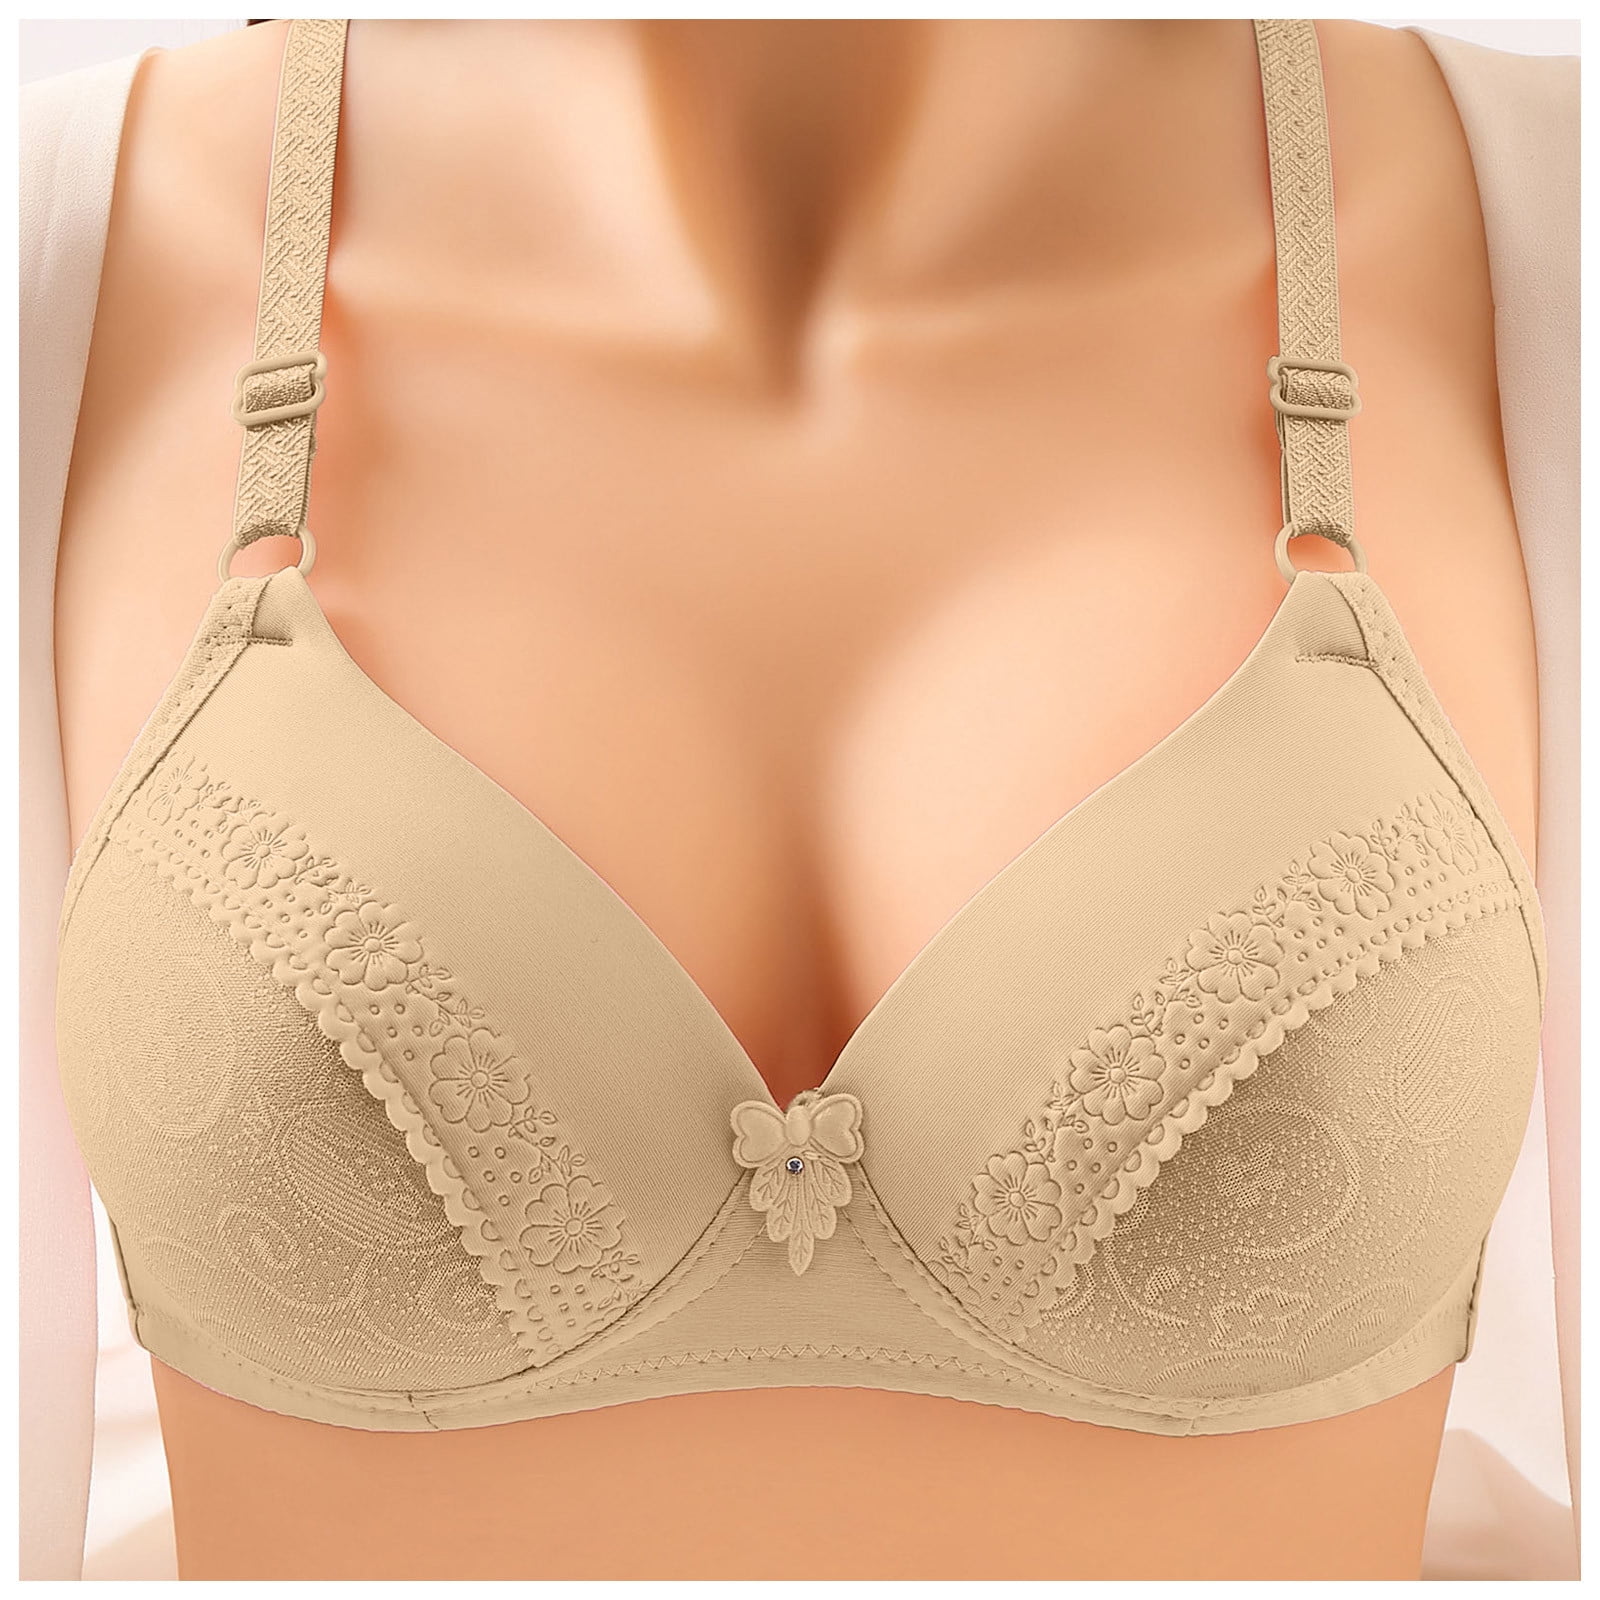 New Large Underwear Women Non Steel Ring Small Breast Collected Thick And  Thin Cup Type Adjustable Anti Slip Breast Bra 46C L220726 From Sihuai10,  $18.04